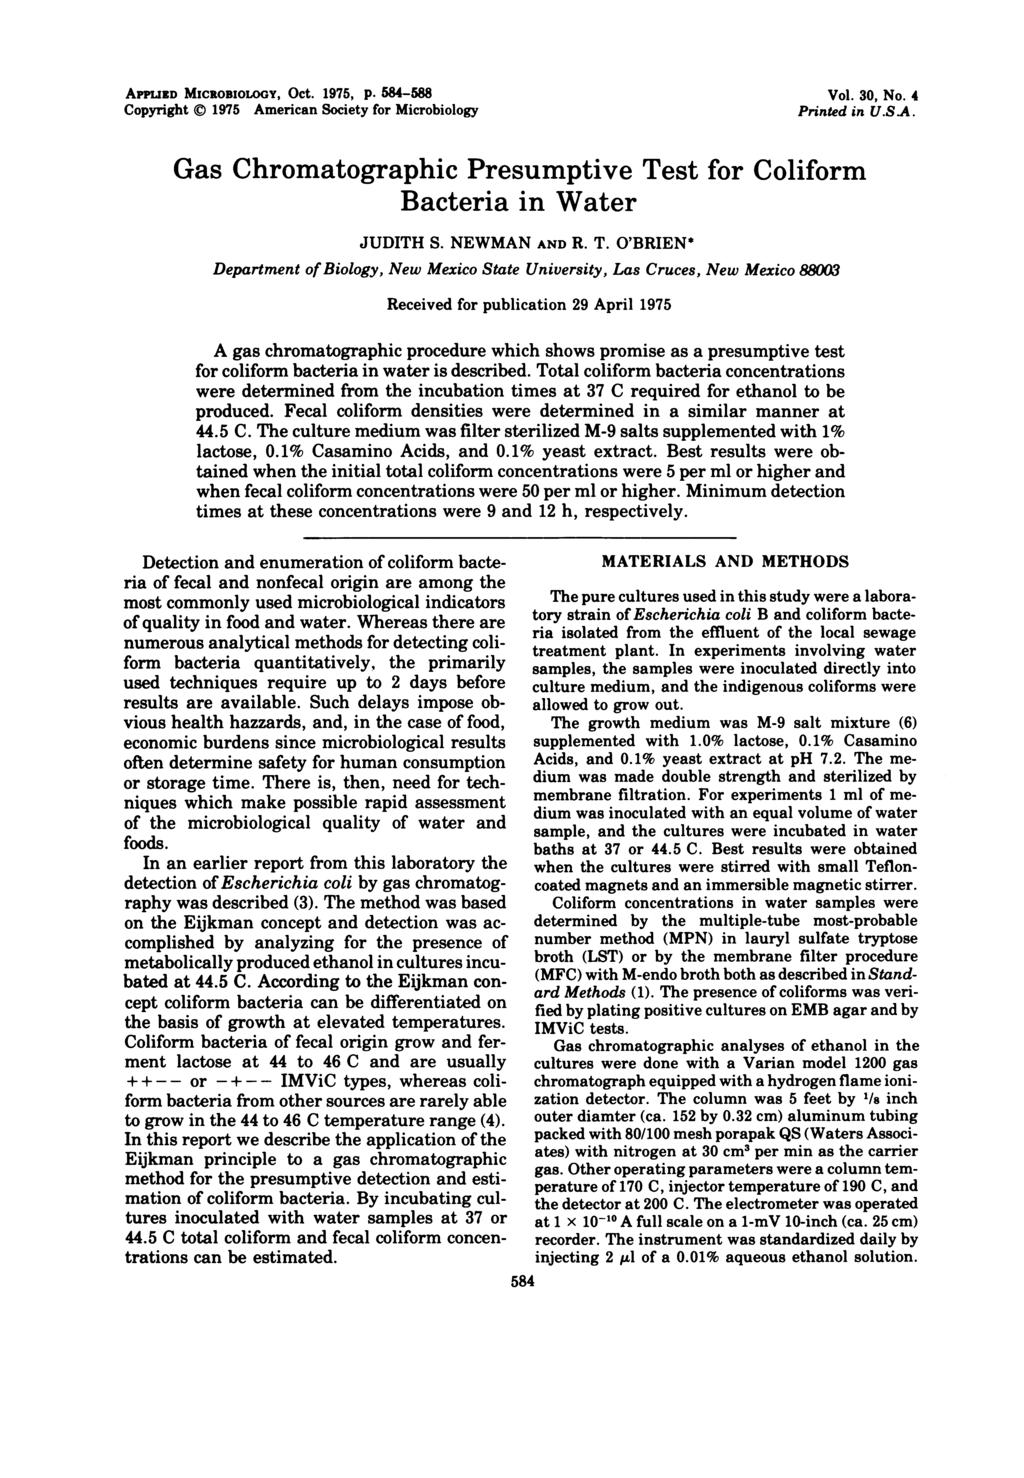 AmPID MICROBIOLOGY, Oct. 1975, P. 584-588 Copyright X) 1975 American Society for Microbiology Vol. 30, No. 4 Printed in U.SA.